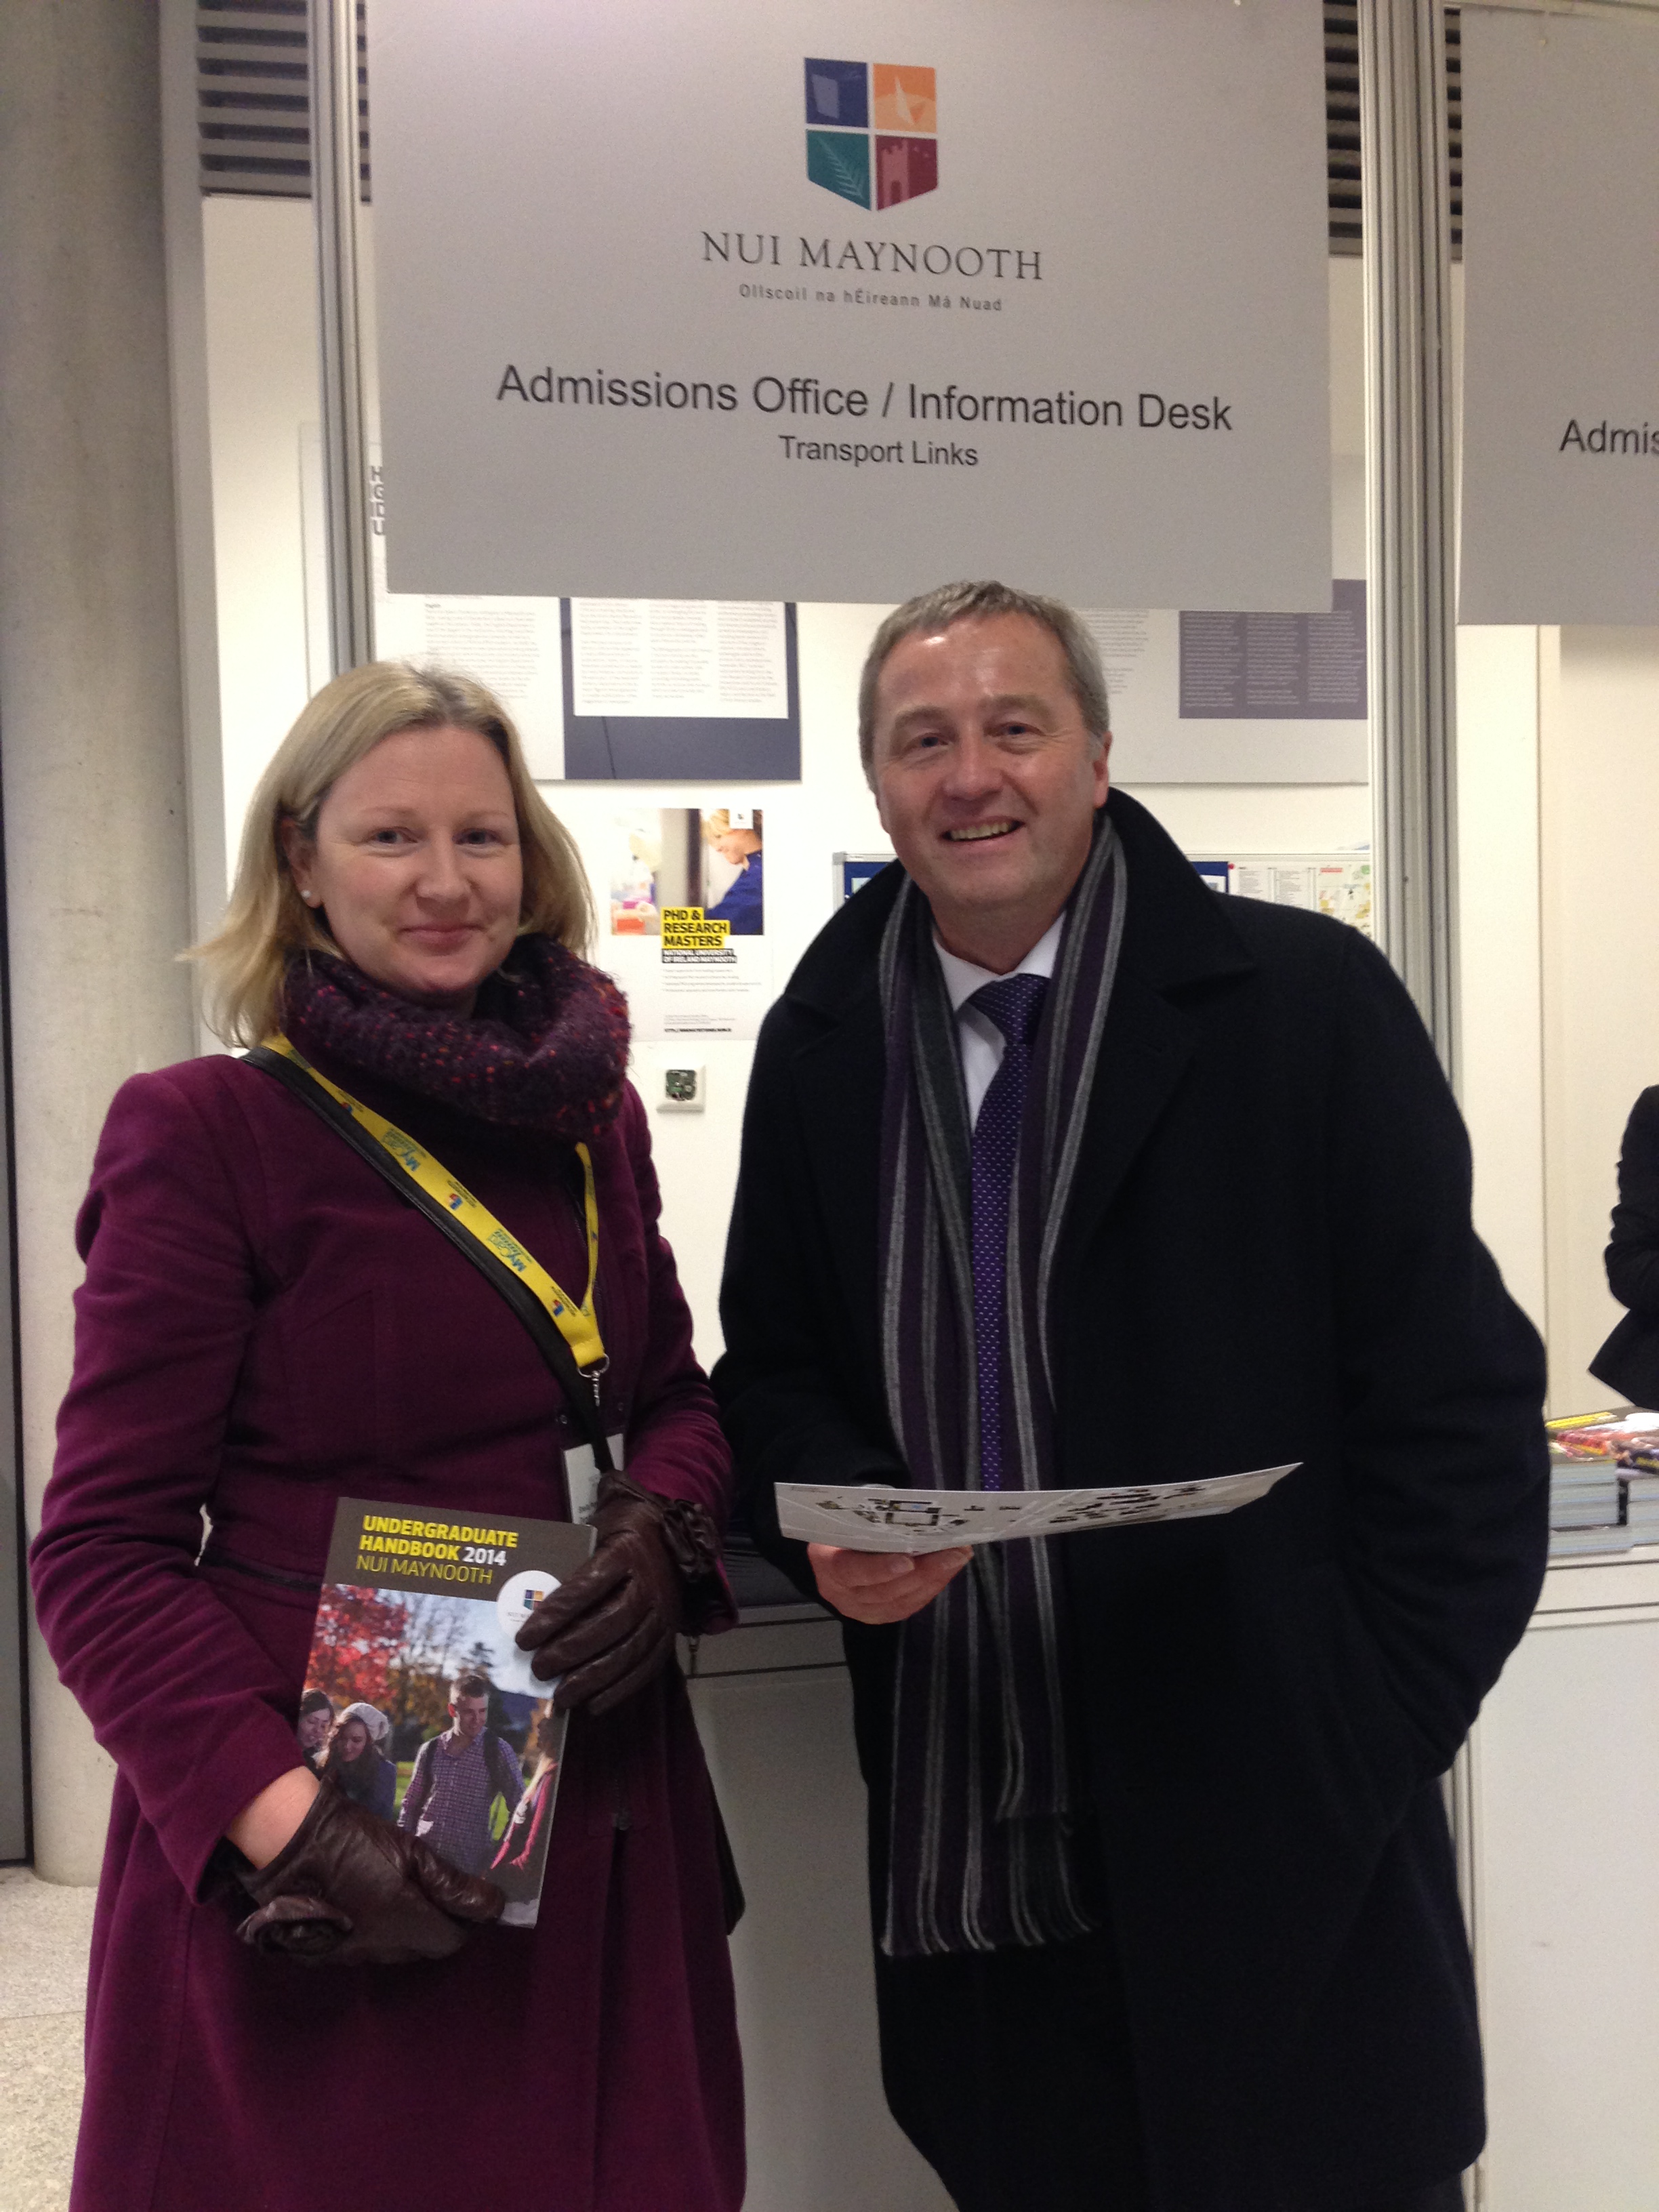 Admissions Officer Dr. John McGinnity with his deputy Sheila Purcell